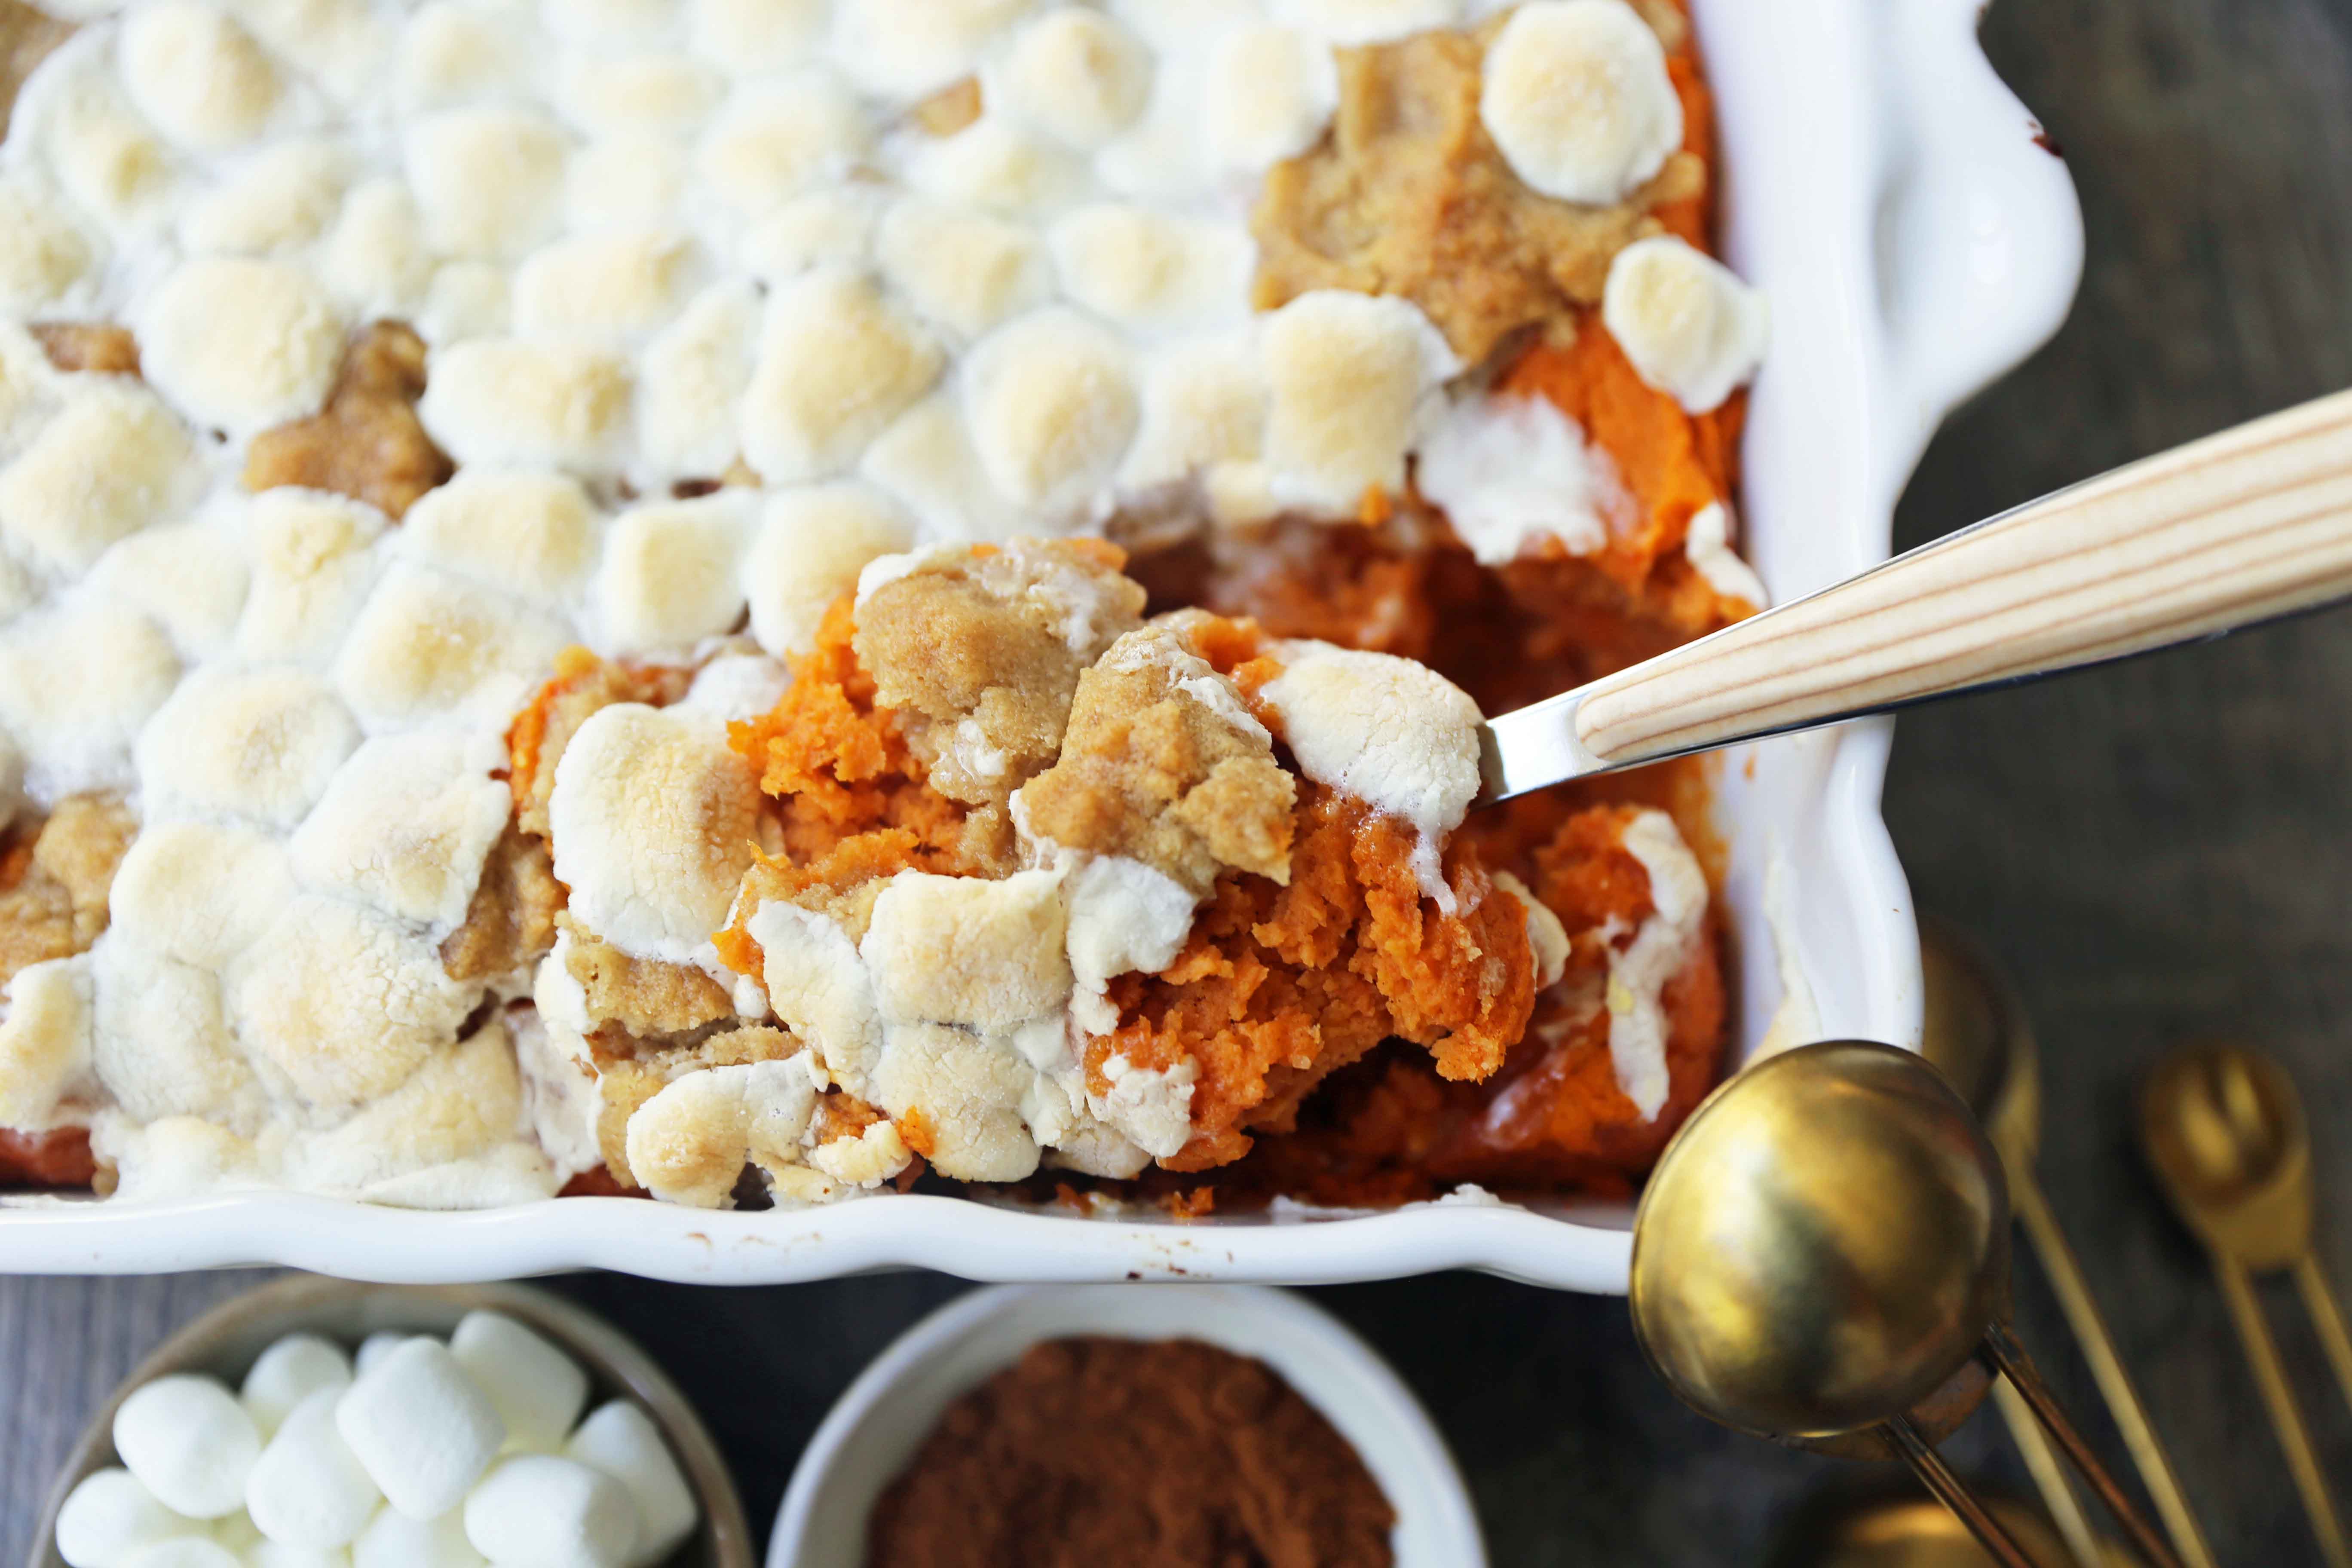 Sweet Potato Casserole with Marshmallows and Streusel. A classic Thanksgiving side dish with savory and creamy sweet potatoes topped with toasted marshmallows and brown sugar streusel. www,modernhoney.com #sweetpotatocasserole #sweetpotatoes #sweetpotatoeswithmarshmallows #thanksgiving #thanksgivingsidedish #sidedish